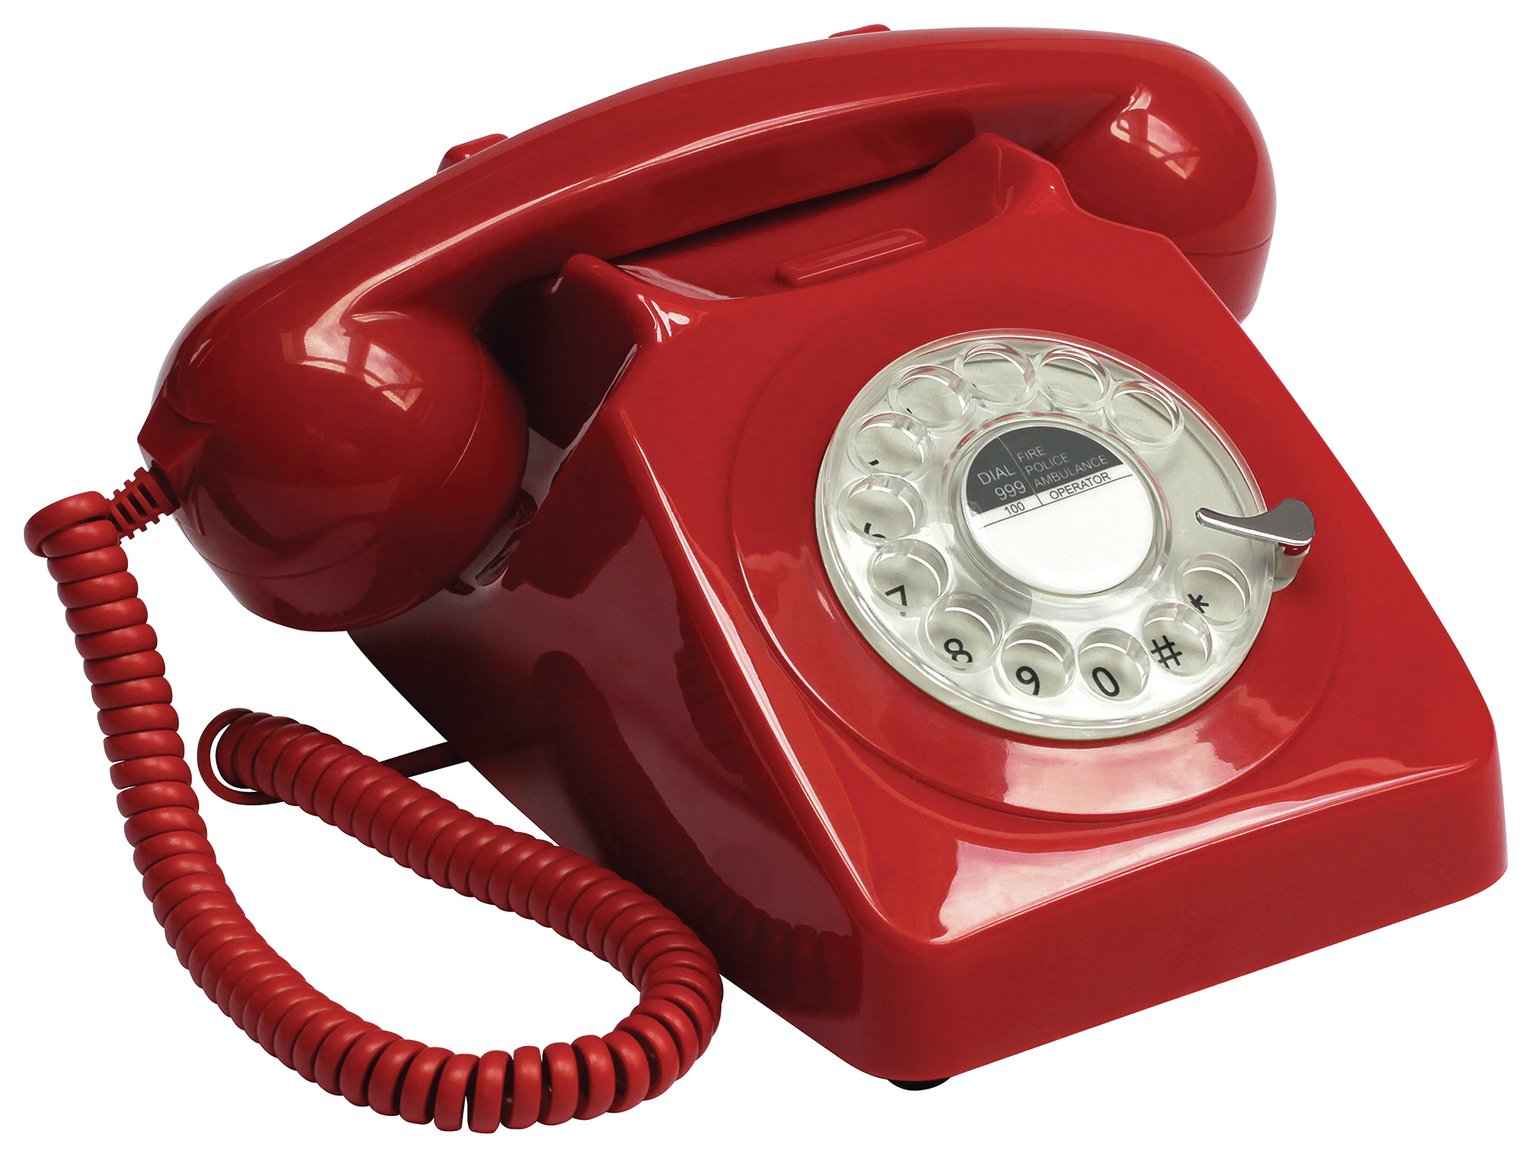 GPO 746 Rotary Dial Corded Telephone - Red